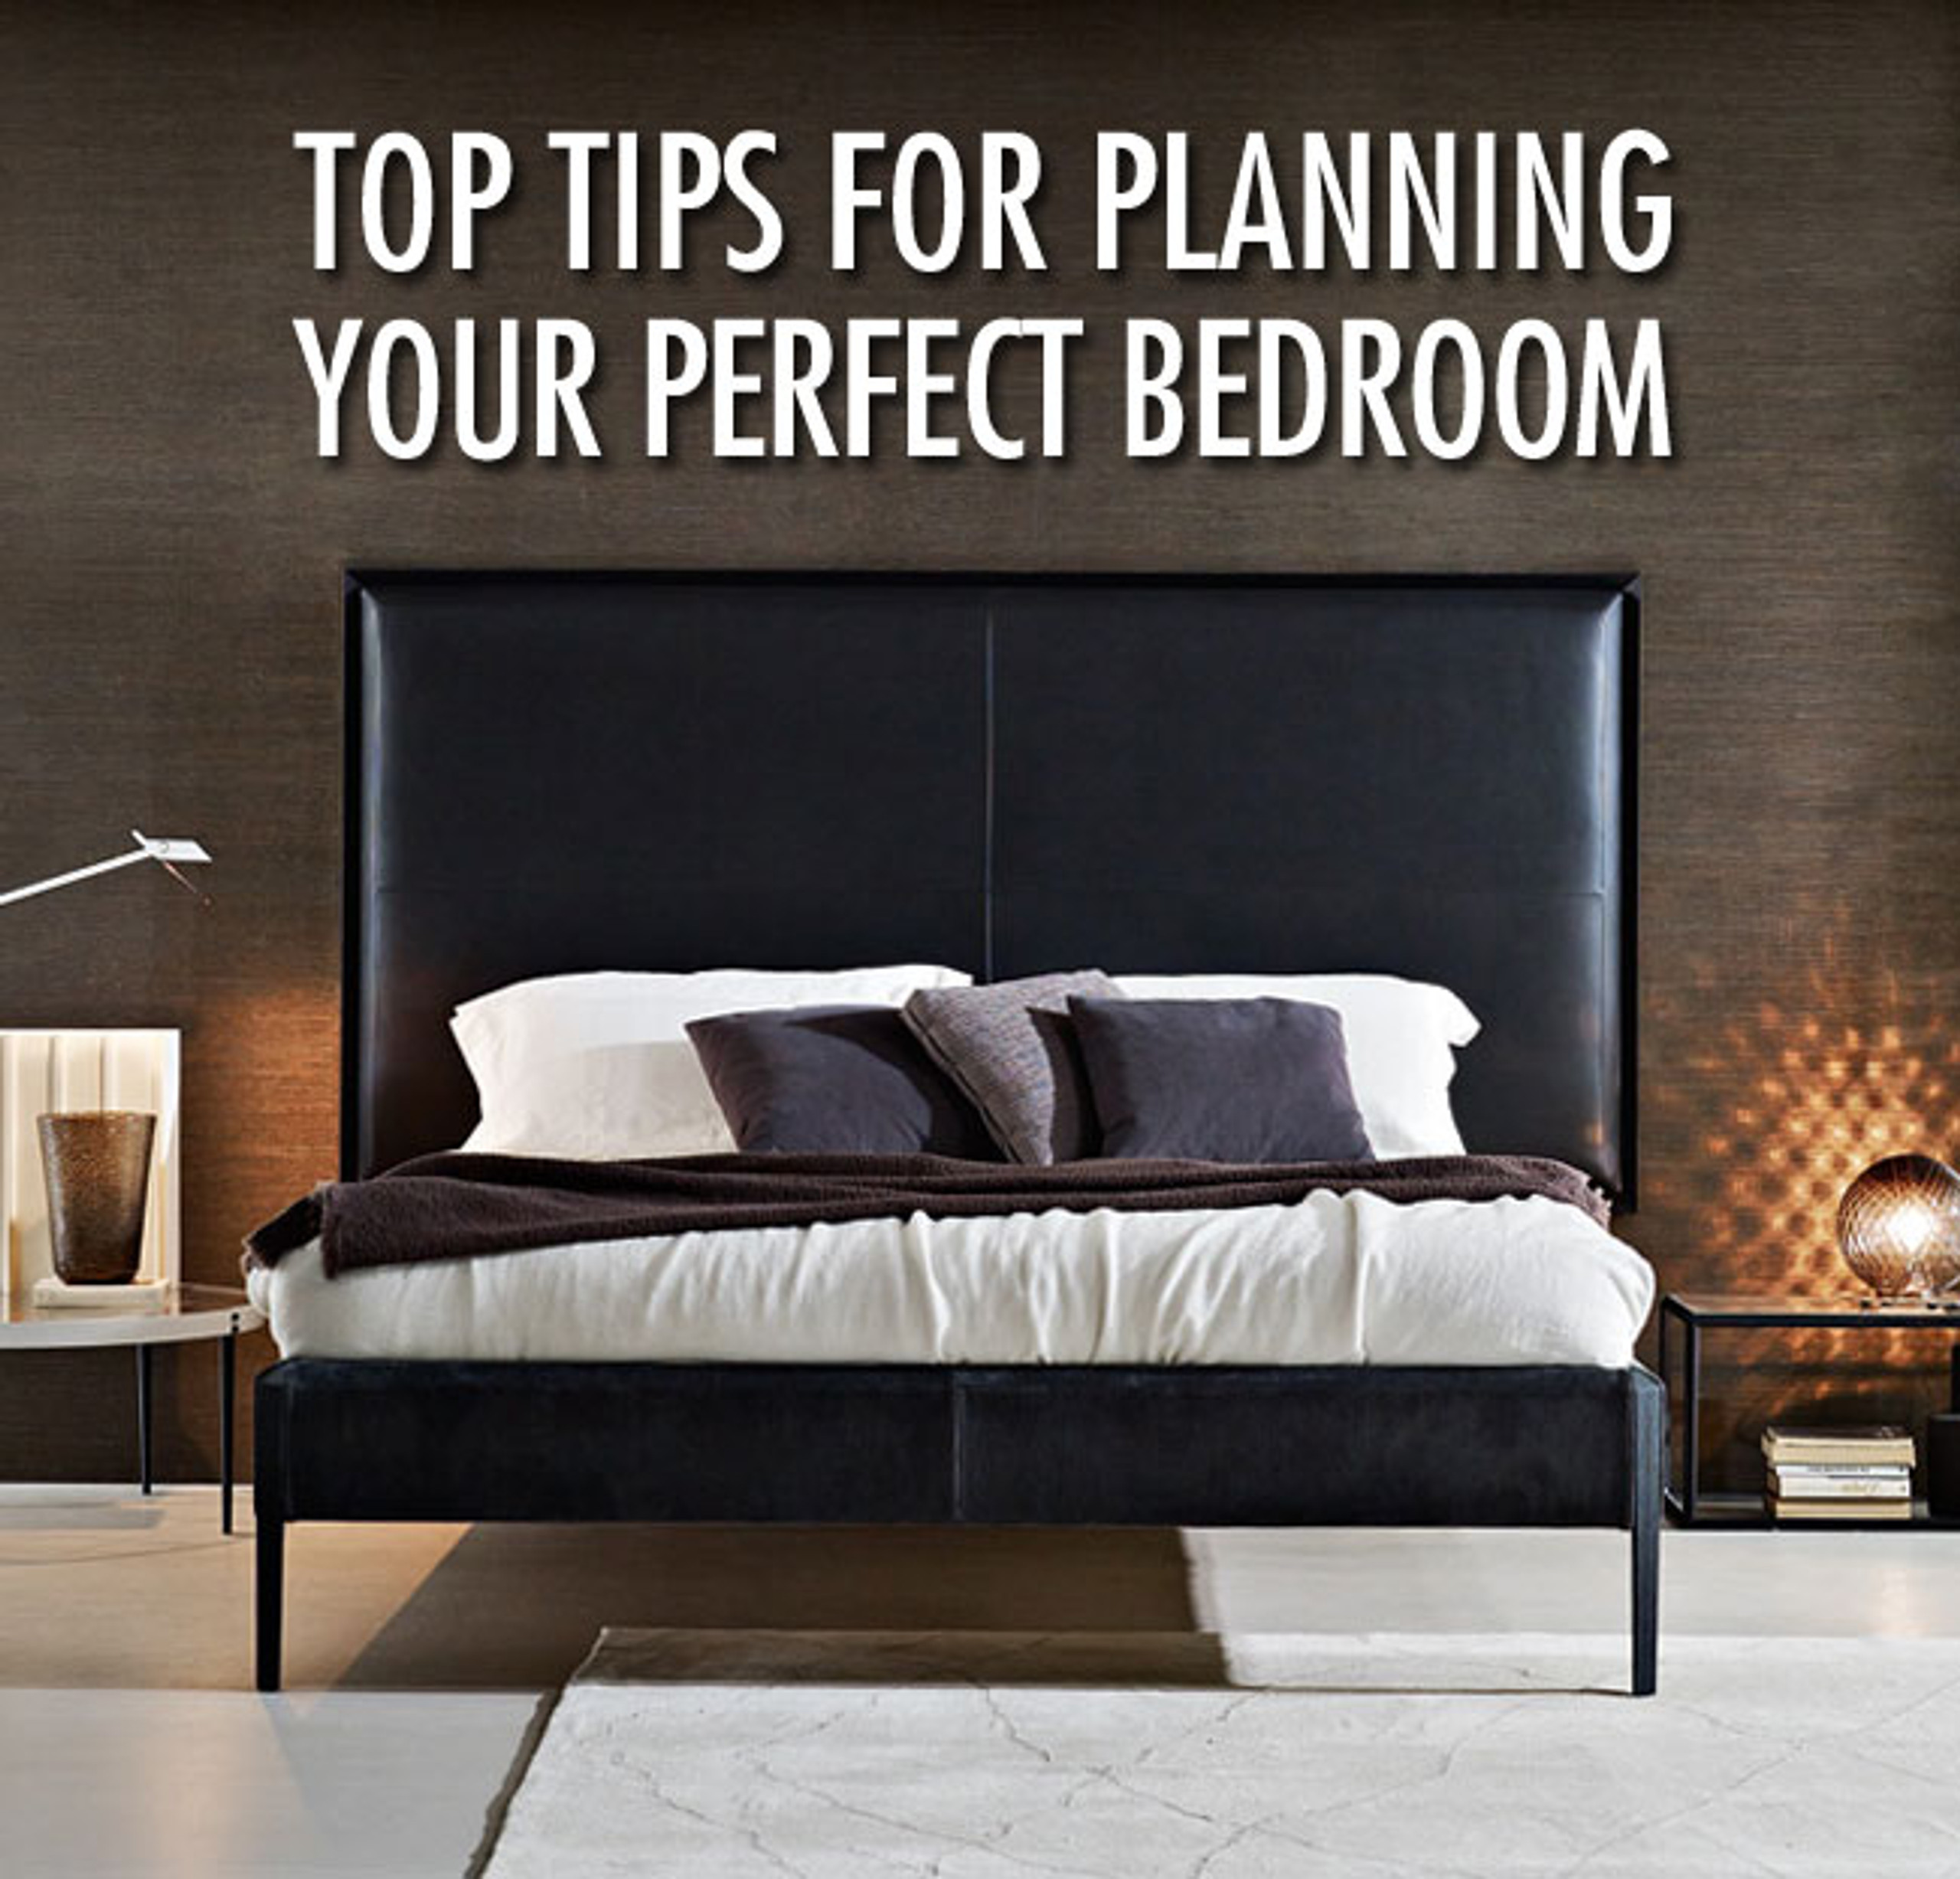 Top Tips for Planning the Perfect Bedroom